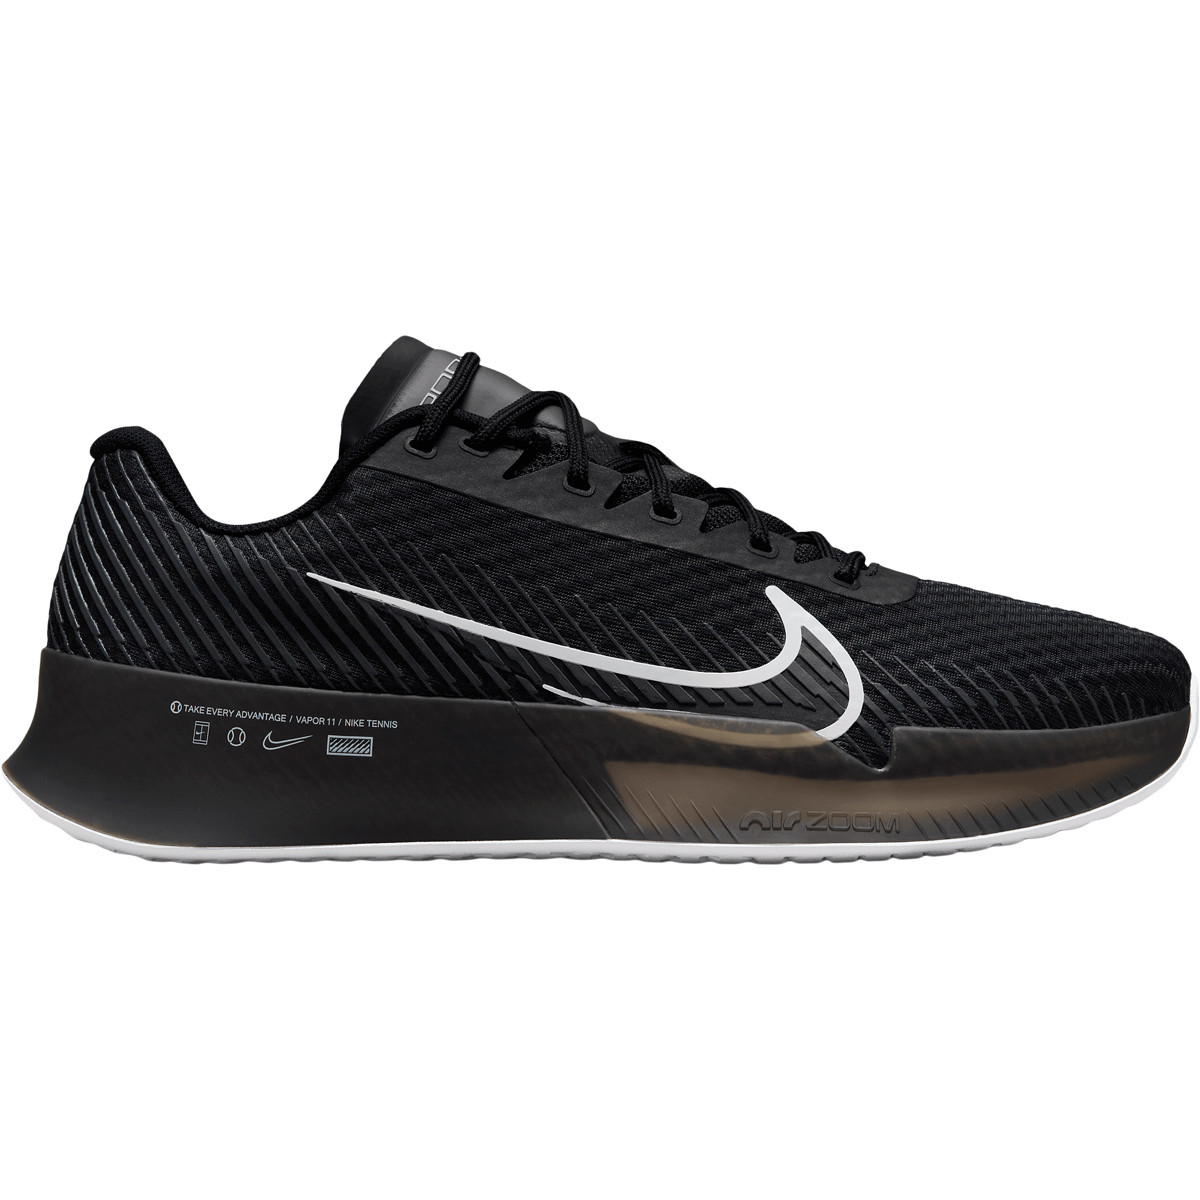 CHAUSSURES NIKE AIR ZOOM VAPOR 11 SURFACES DURES - NIKE - Homme